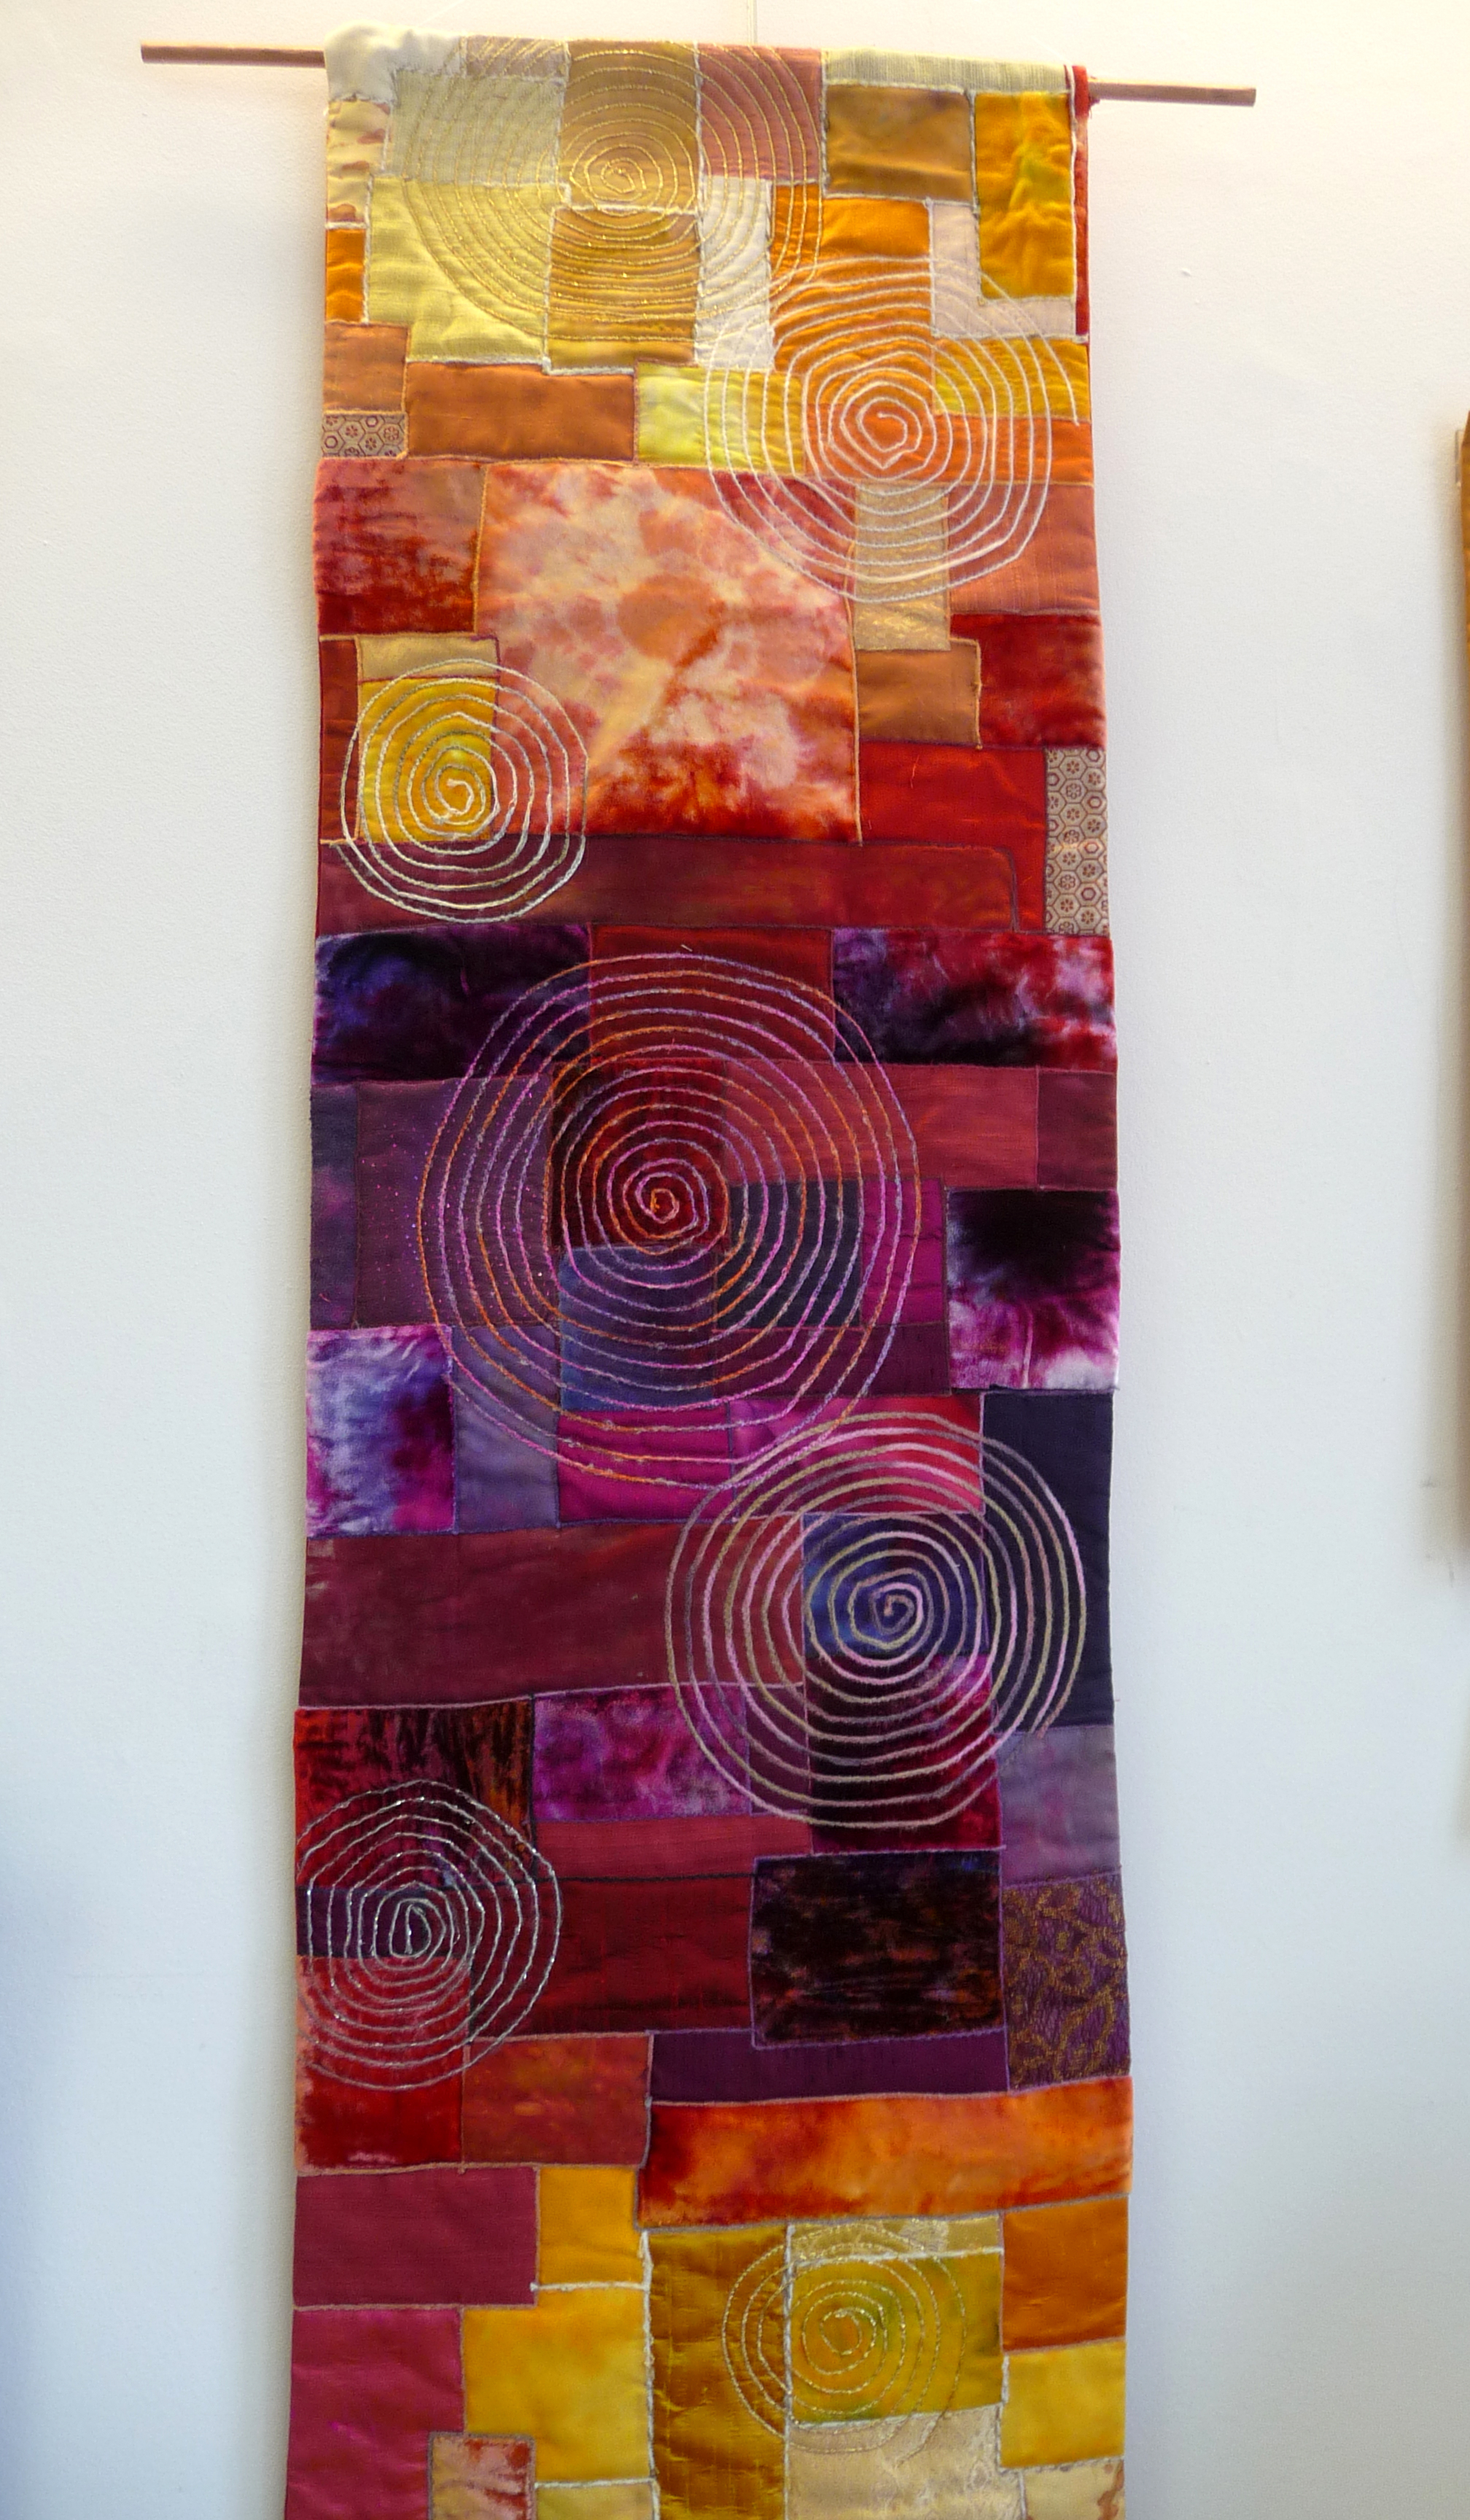 RED HOT SPIRAL GALAXY by Eileen Norris, quilted wall hanging